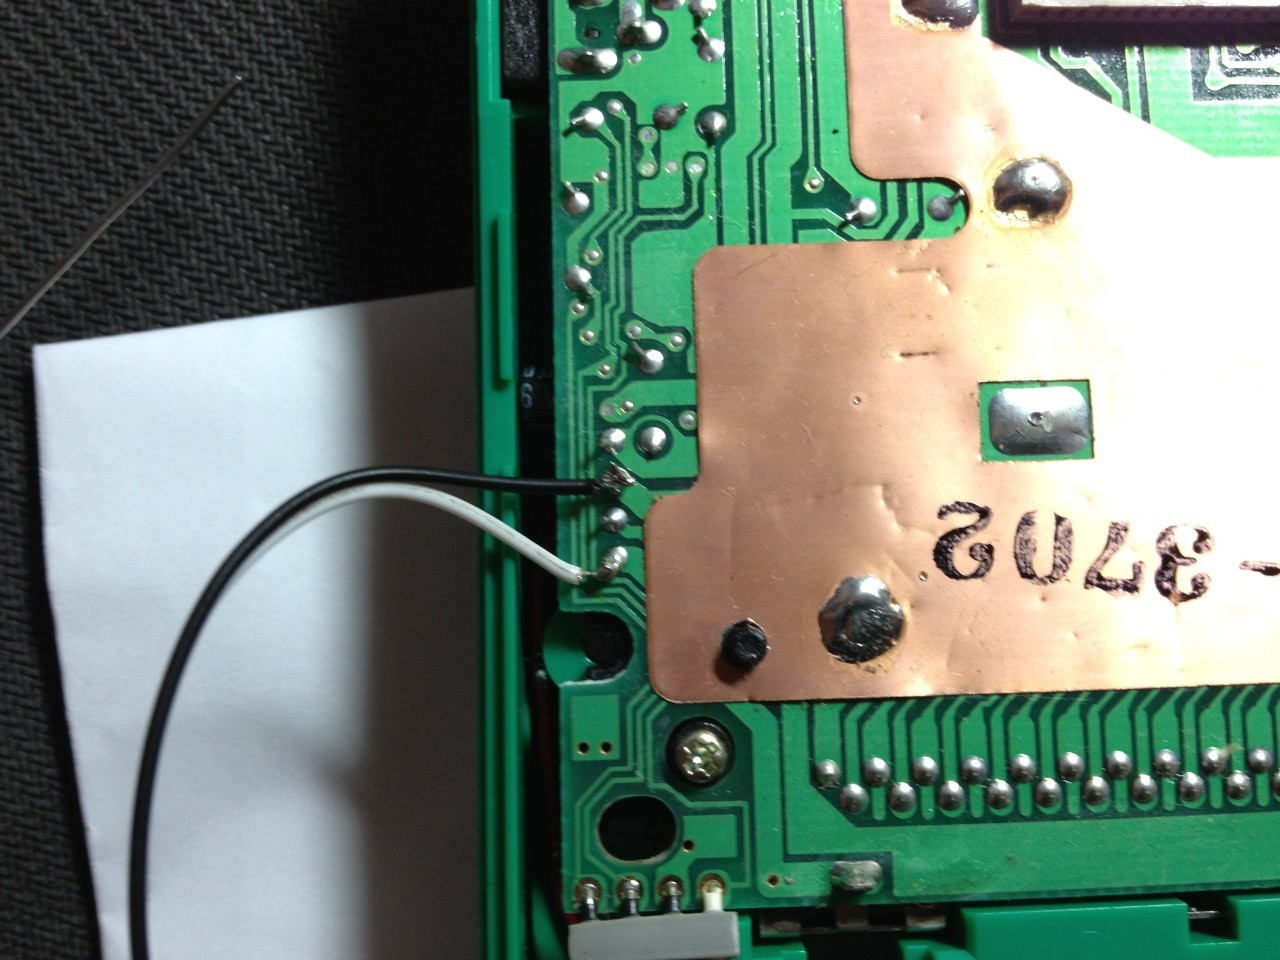 Soldered power wires to the back circuit board